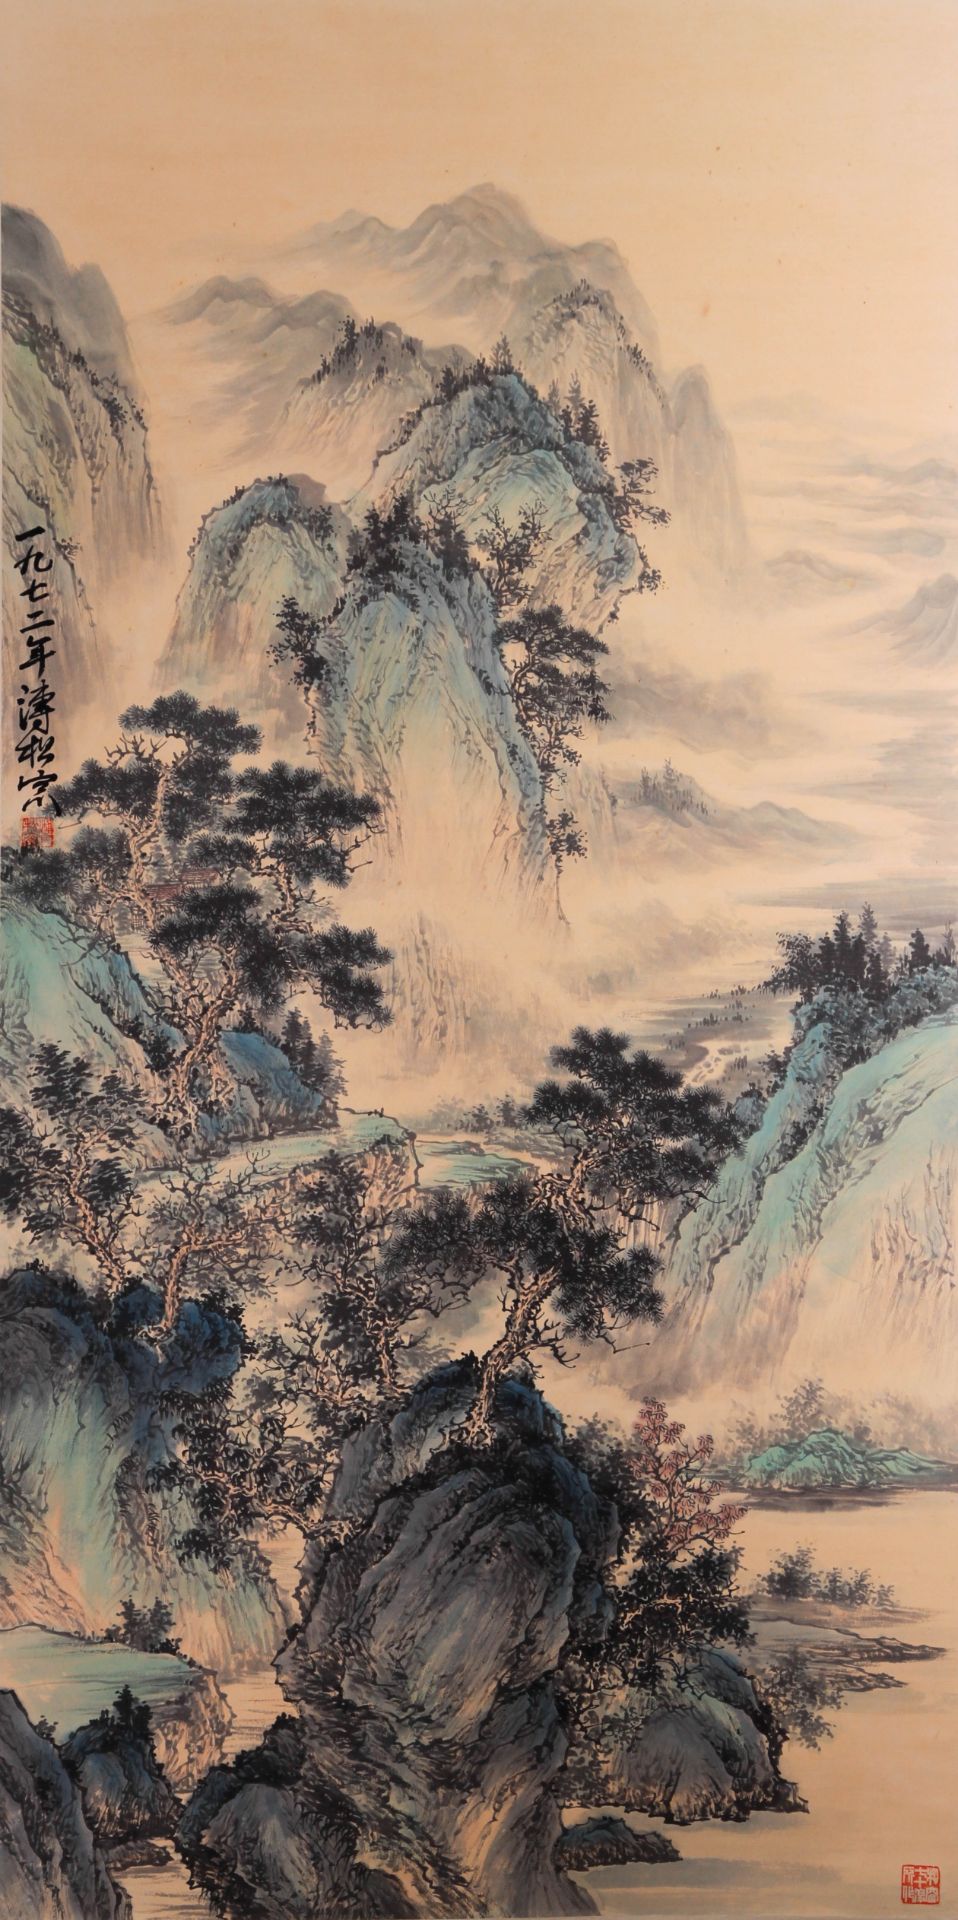 A Chinese Scroll Painting By Aixinjueluo Puquan